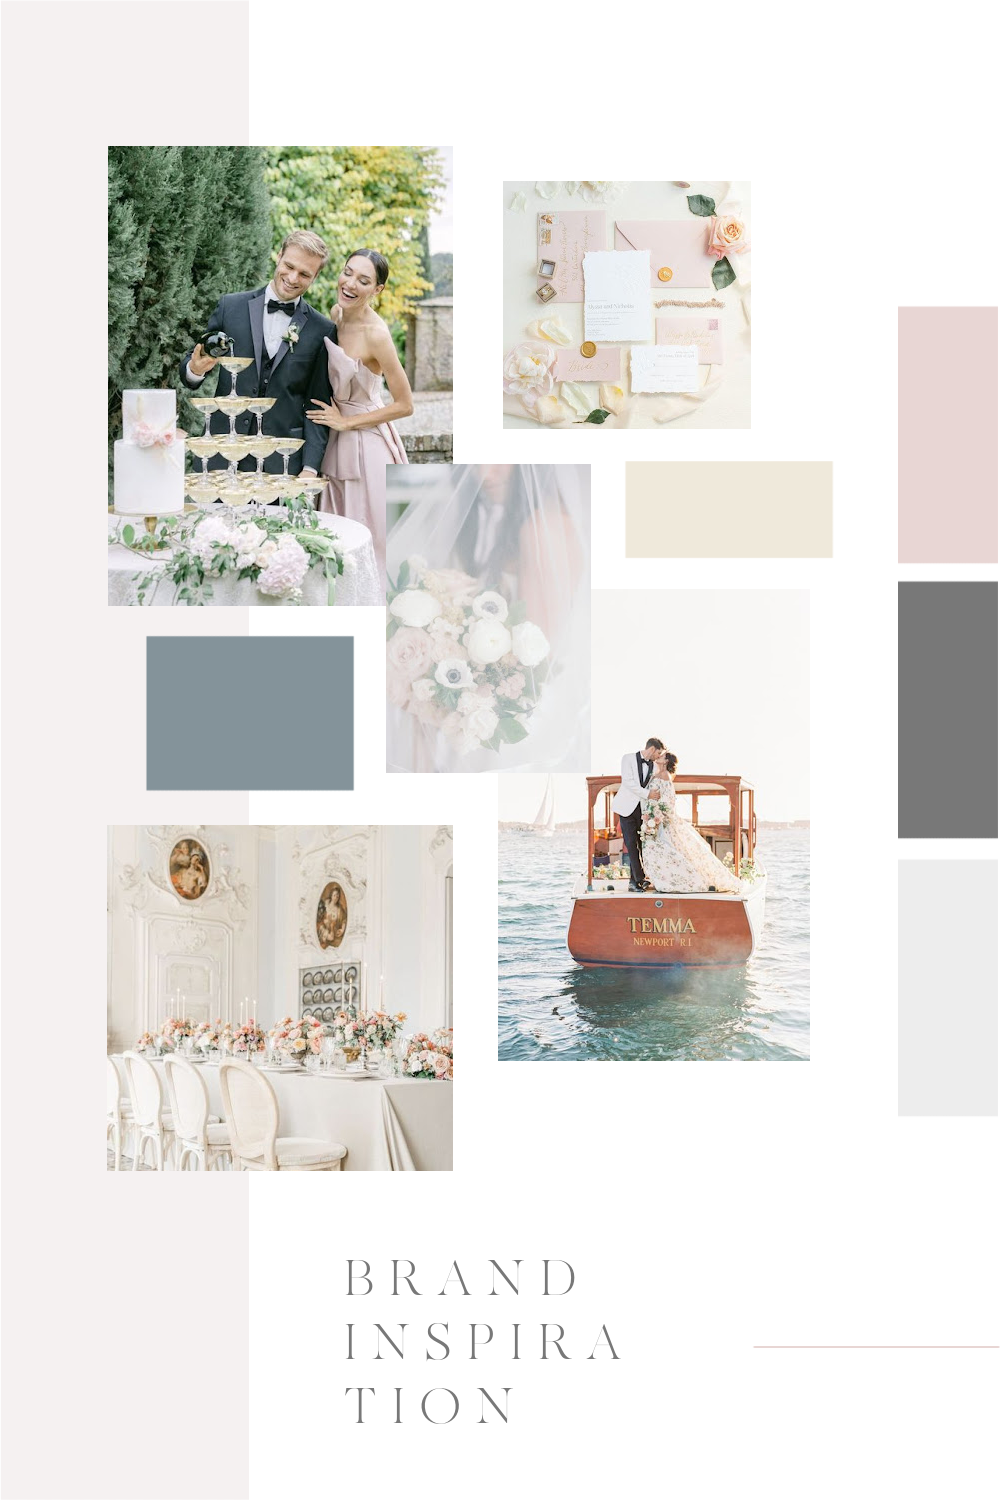 Mood board featuring inspiration imagery and colors for McKee Events, a luxury southeast wedding planner. Brand and showit design.